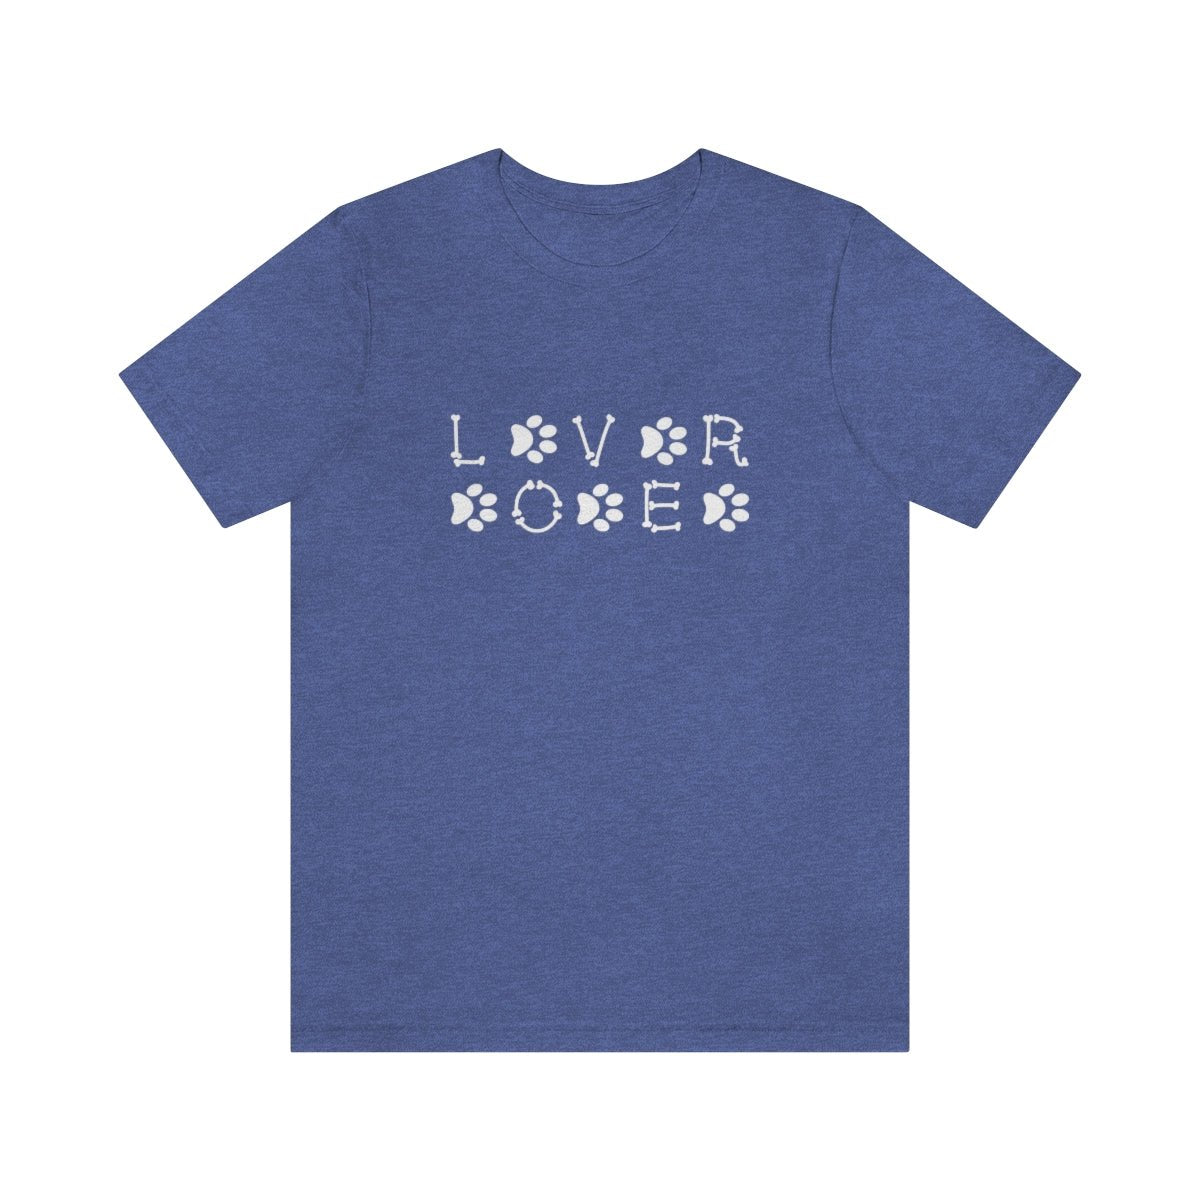 Dog Lover Men's Royal Blue Jersey Short Sleeve Tee - ZumBuys